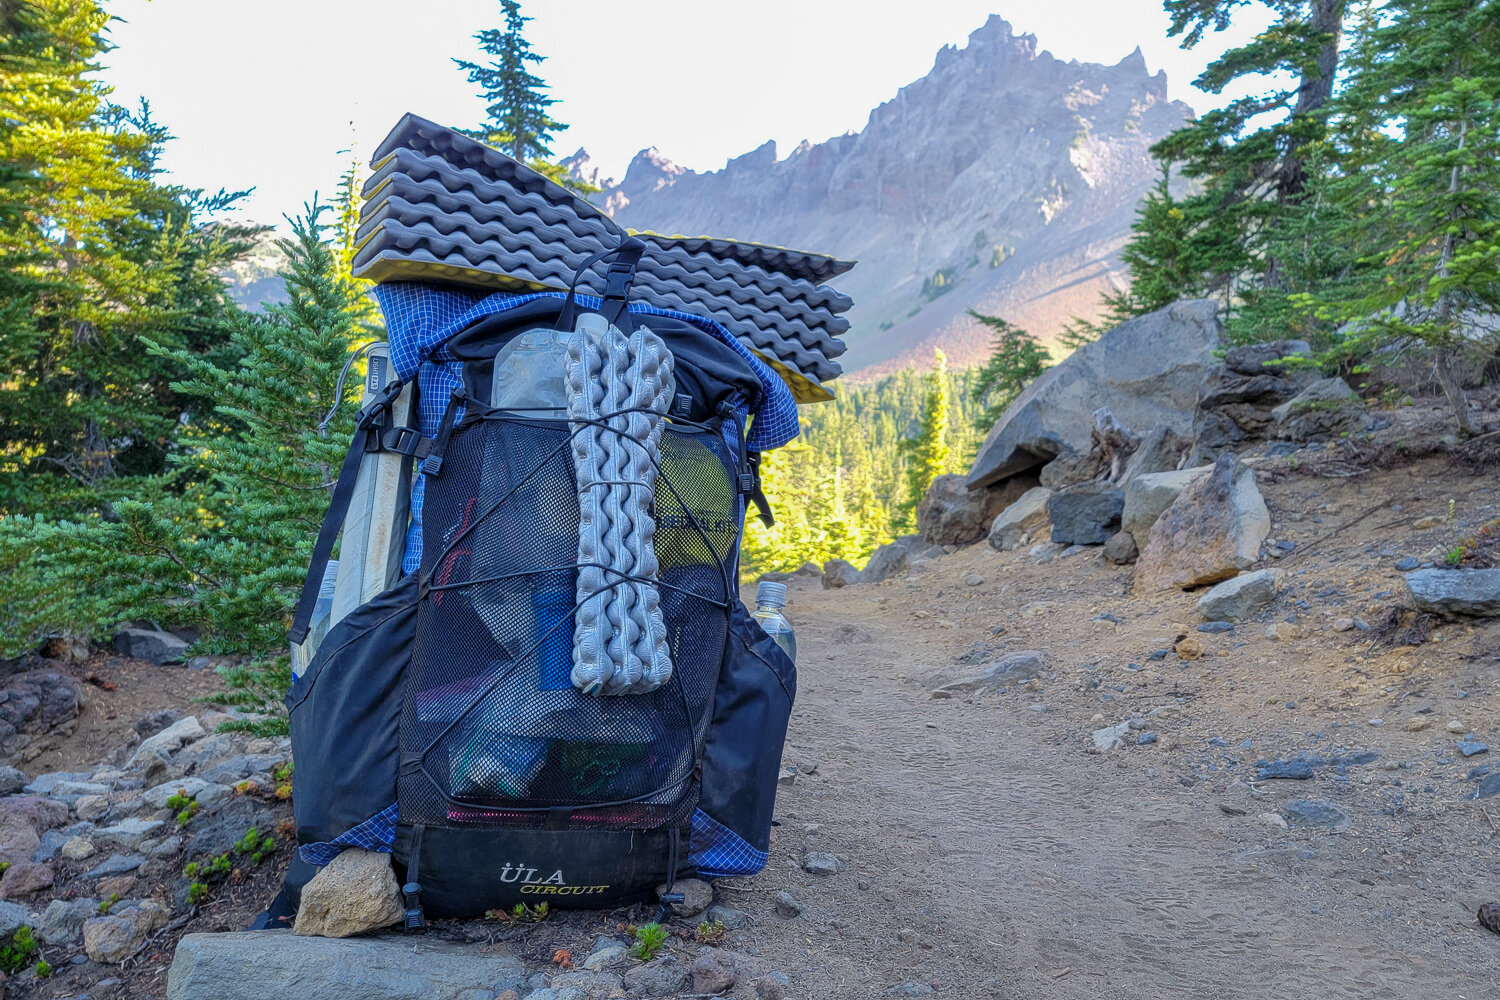 The ULA Circuit backpack is designed by thru-hikers, so it’s really dialed in for everyday needs on the trail